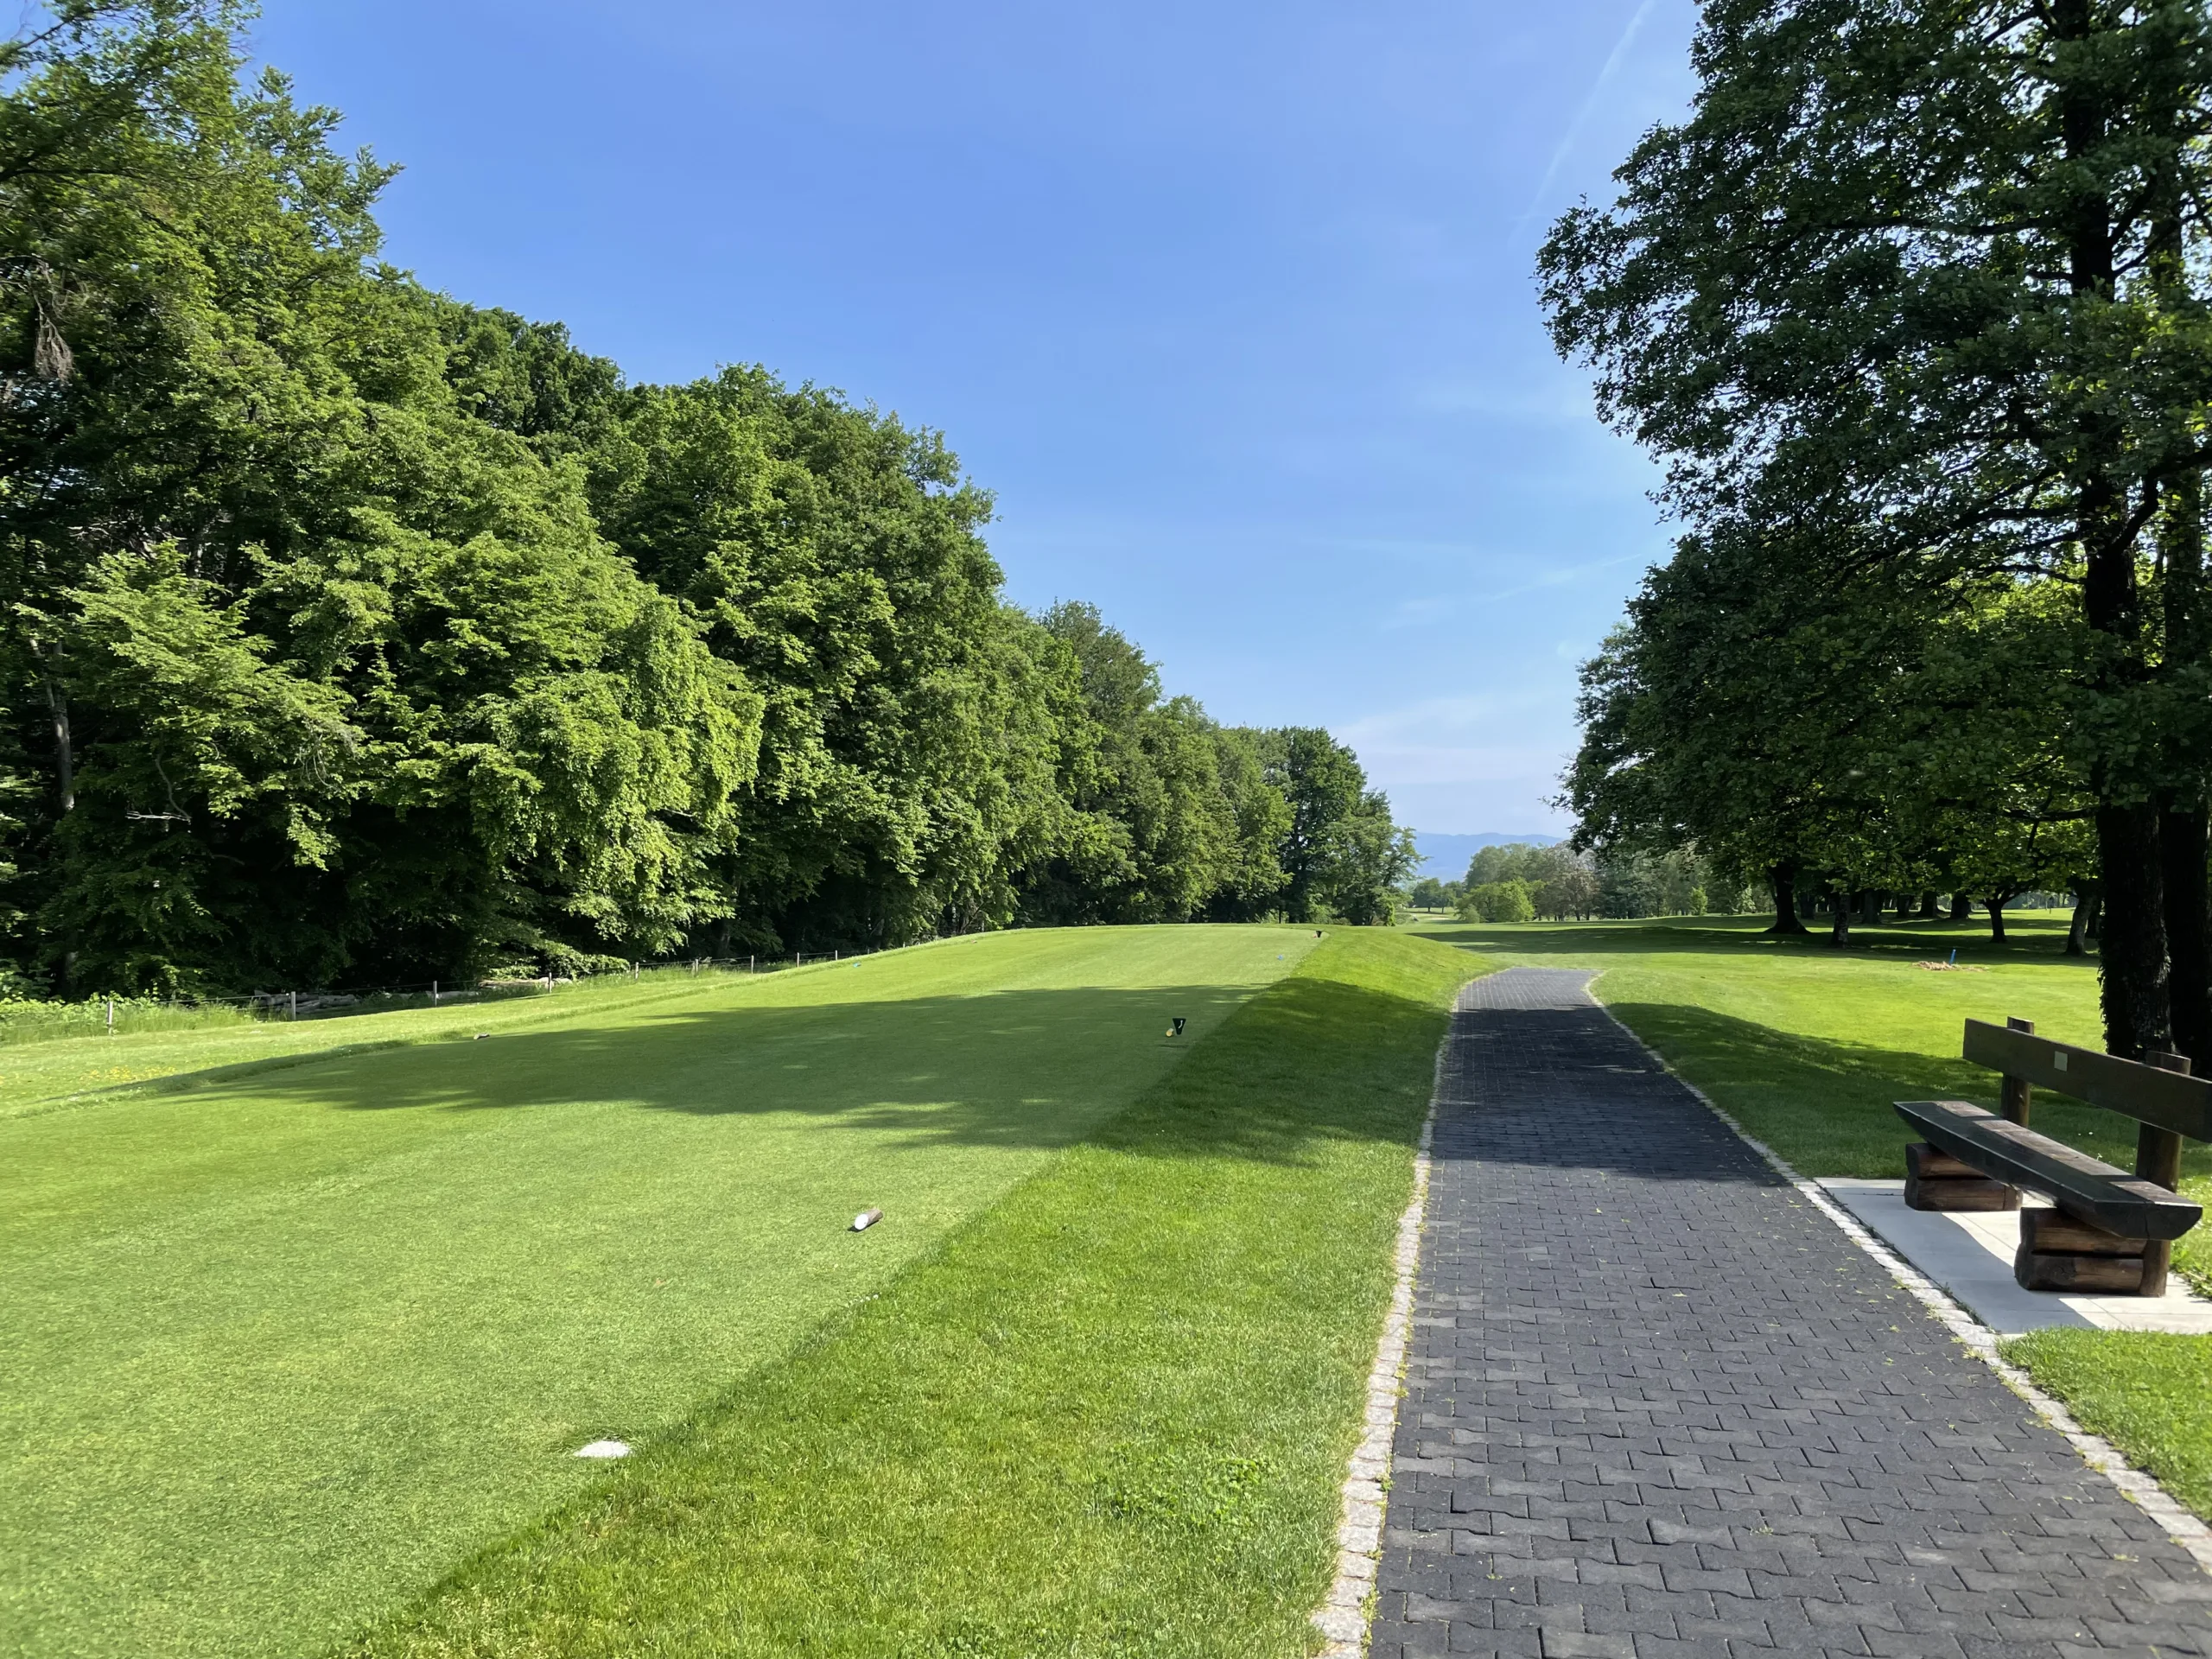 Golf & Country Club Basel – Public Golf Courses in Grand Est, France